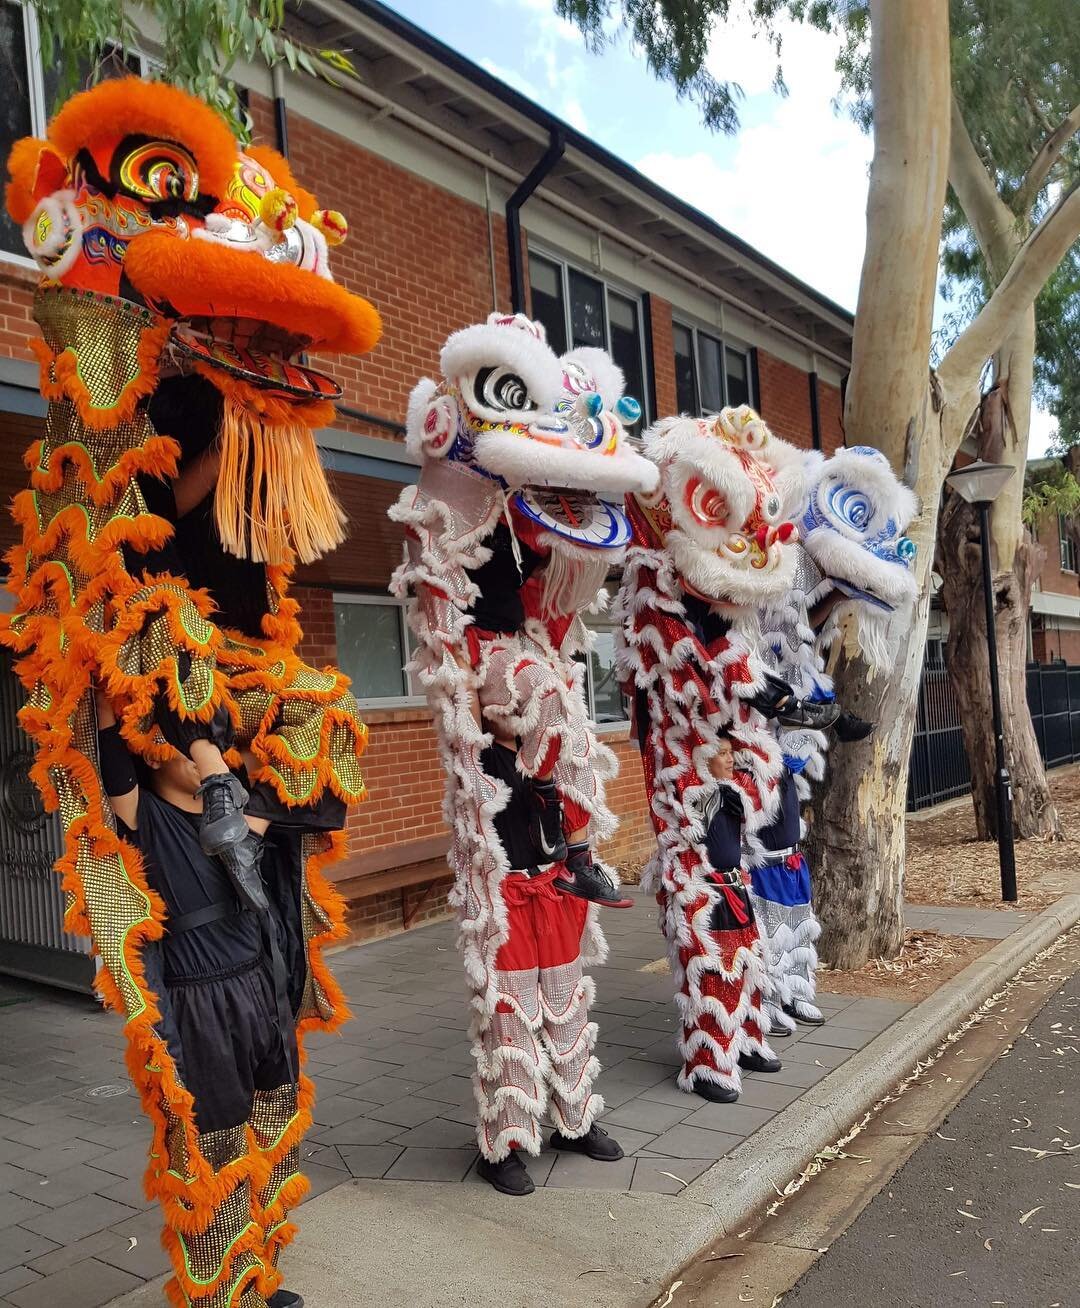 The best way to complete the last day of performance: meeting up with our other half 😍 ~Phap Hoa x Long Hoa~

Was awesome meeting up and owning the spotlight with our brothers and sisters at Long Hoa Lion Dance! Too bad we couldnt get a whole group 